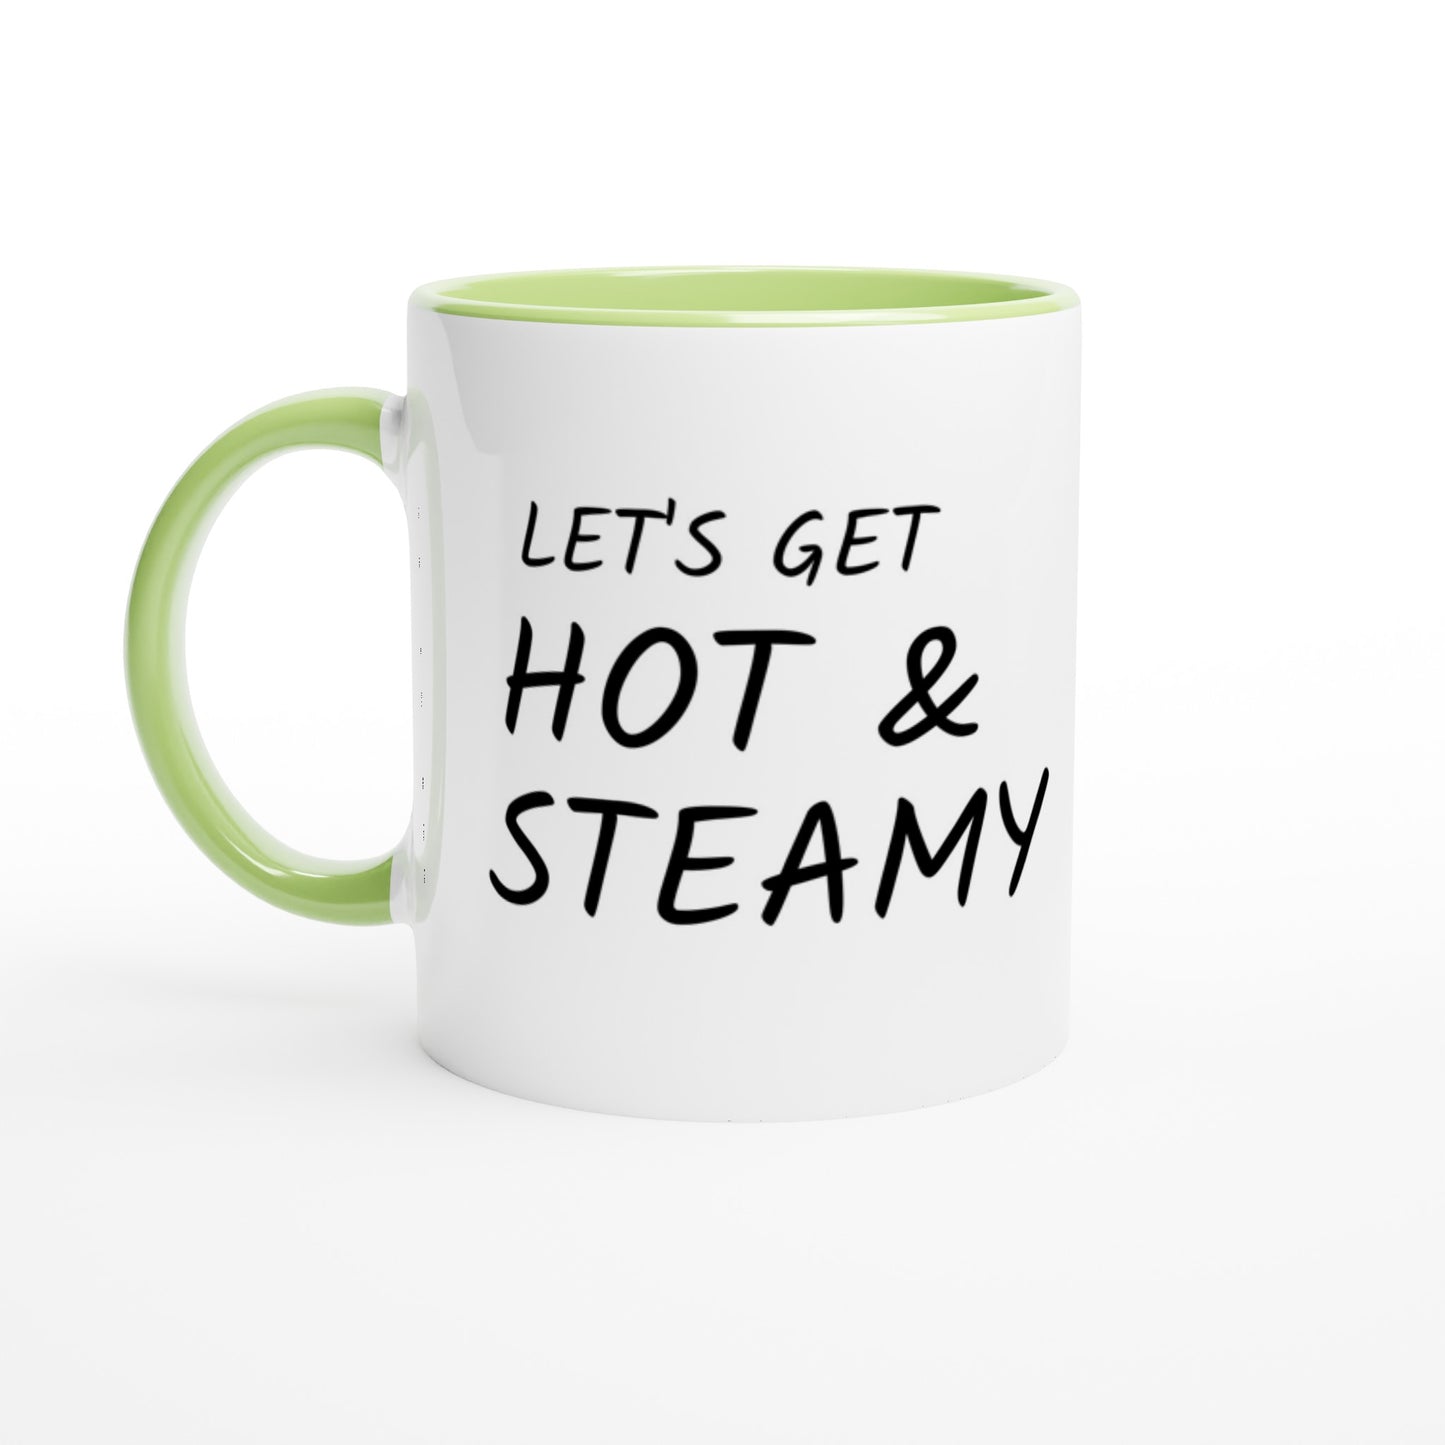 Let's Get Hot & Steamy - Colored